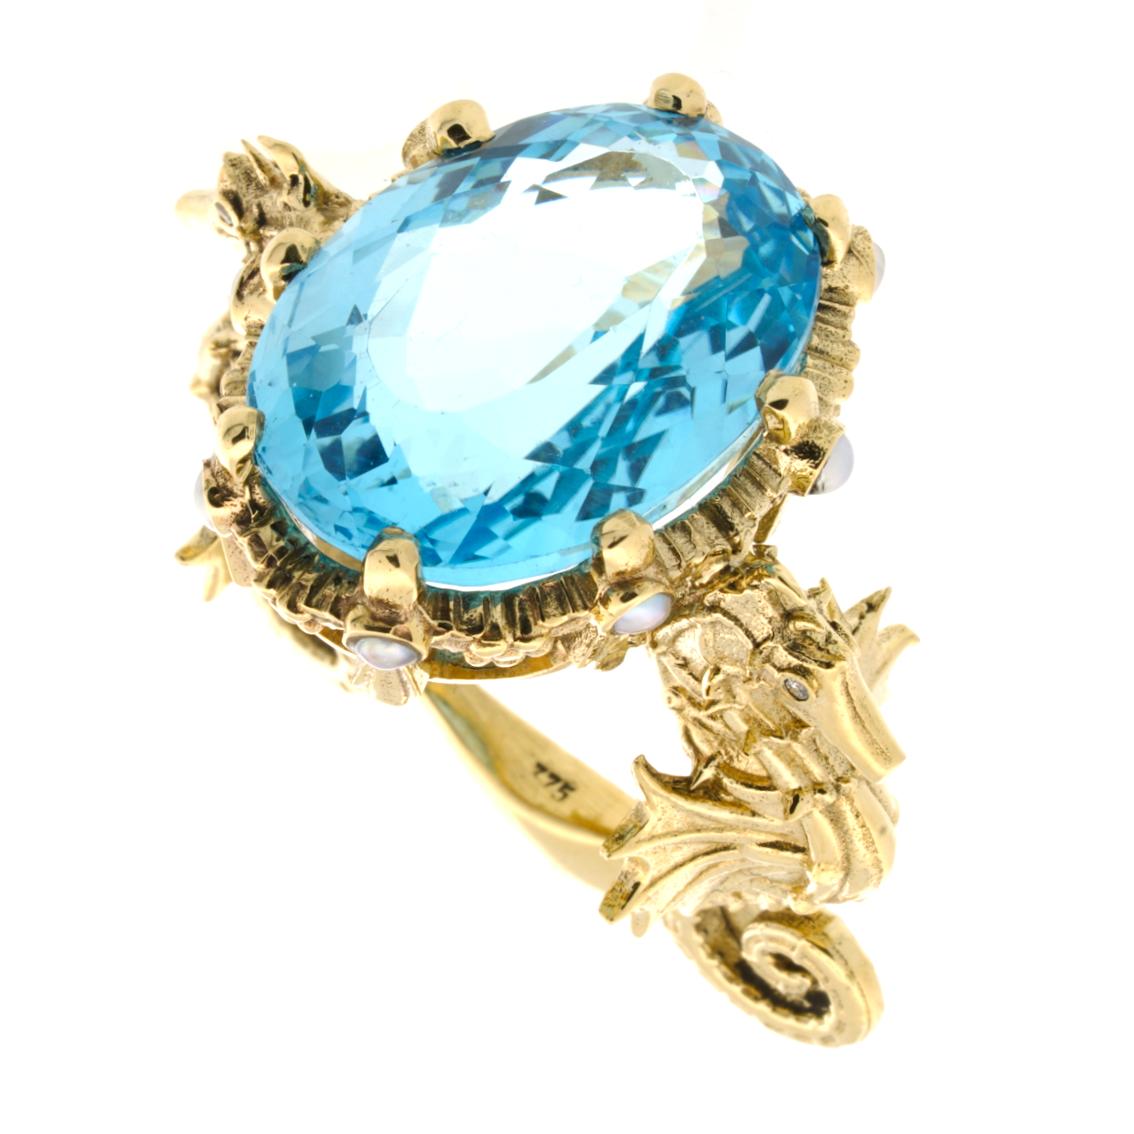 Hand crafted in 9kt yellow gold, the Crowned Oceanides Ring is a breathtaking jewel to behold. It features a luminescent 20.38ct natural oval cut Swiss blue topaz perched in all it's glory atop a garland crown studded with eight 2mm natural pearls,